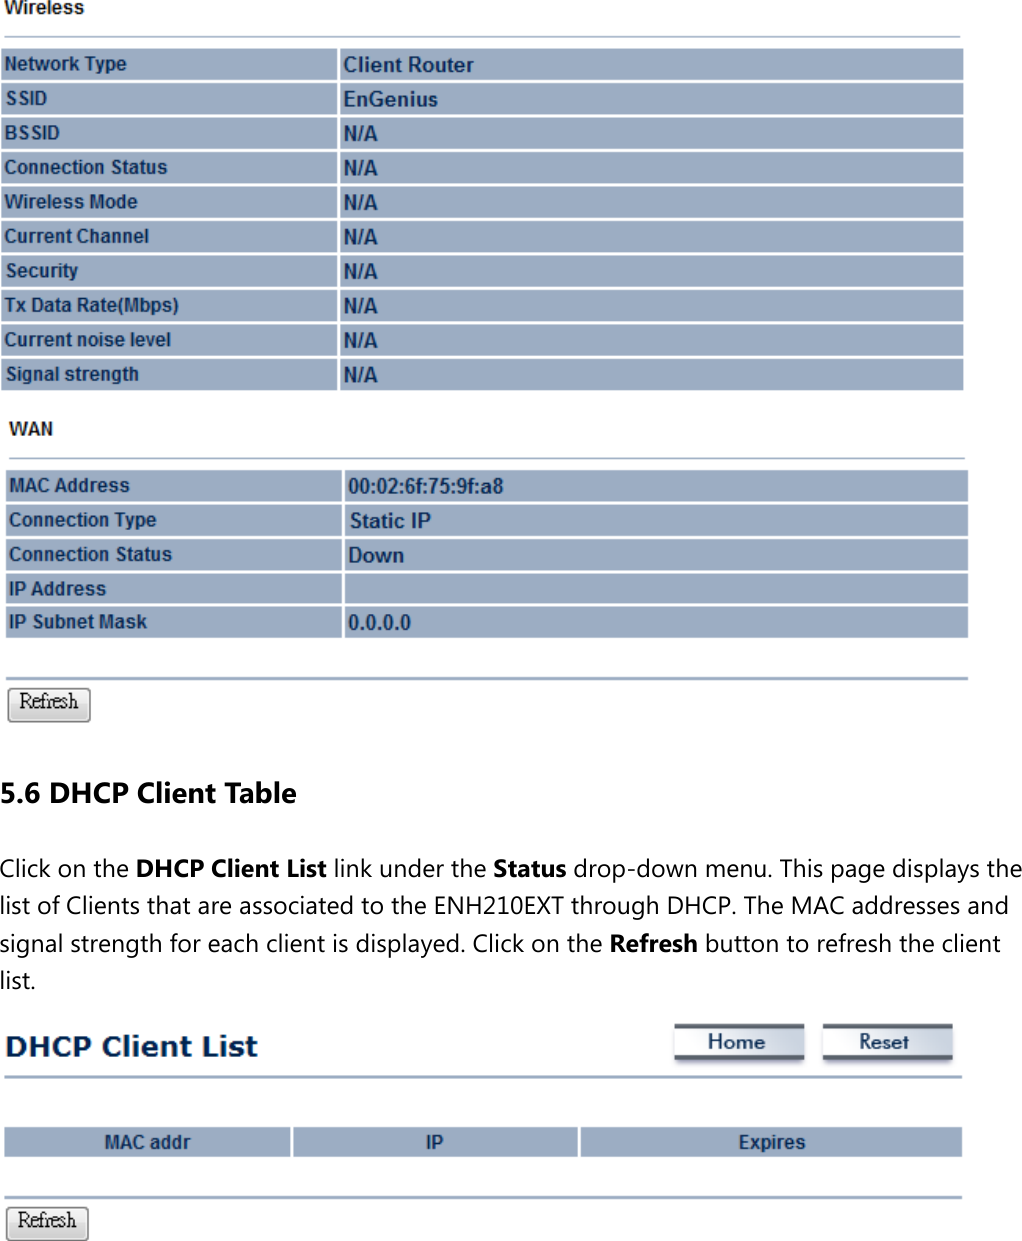  5.6 DHCP Client Table Click on the DHCP Client List link under the Status drop-down menu. This page displays the list of Clients that are associated to the ENH210EXT through DHCP. The MAC addresses and signal strength for each client is displayed. Click on the Refresh button to refresh the client list.   